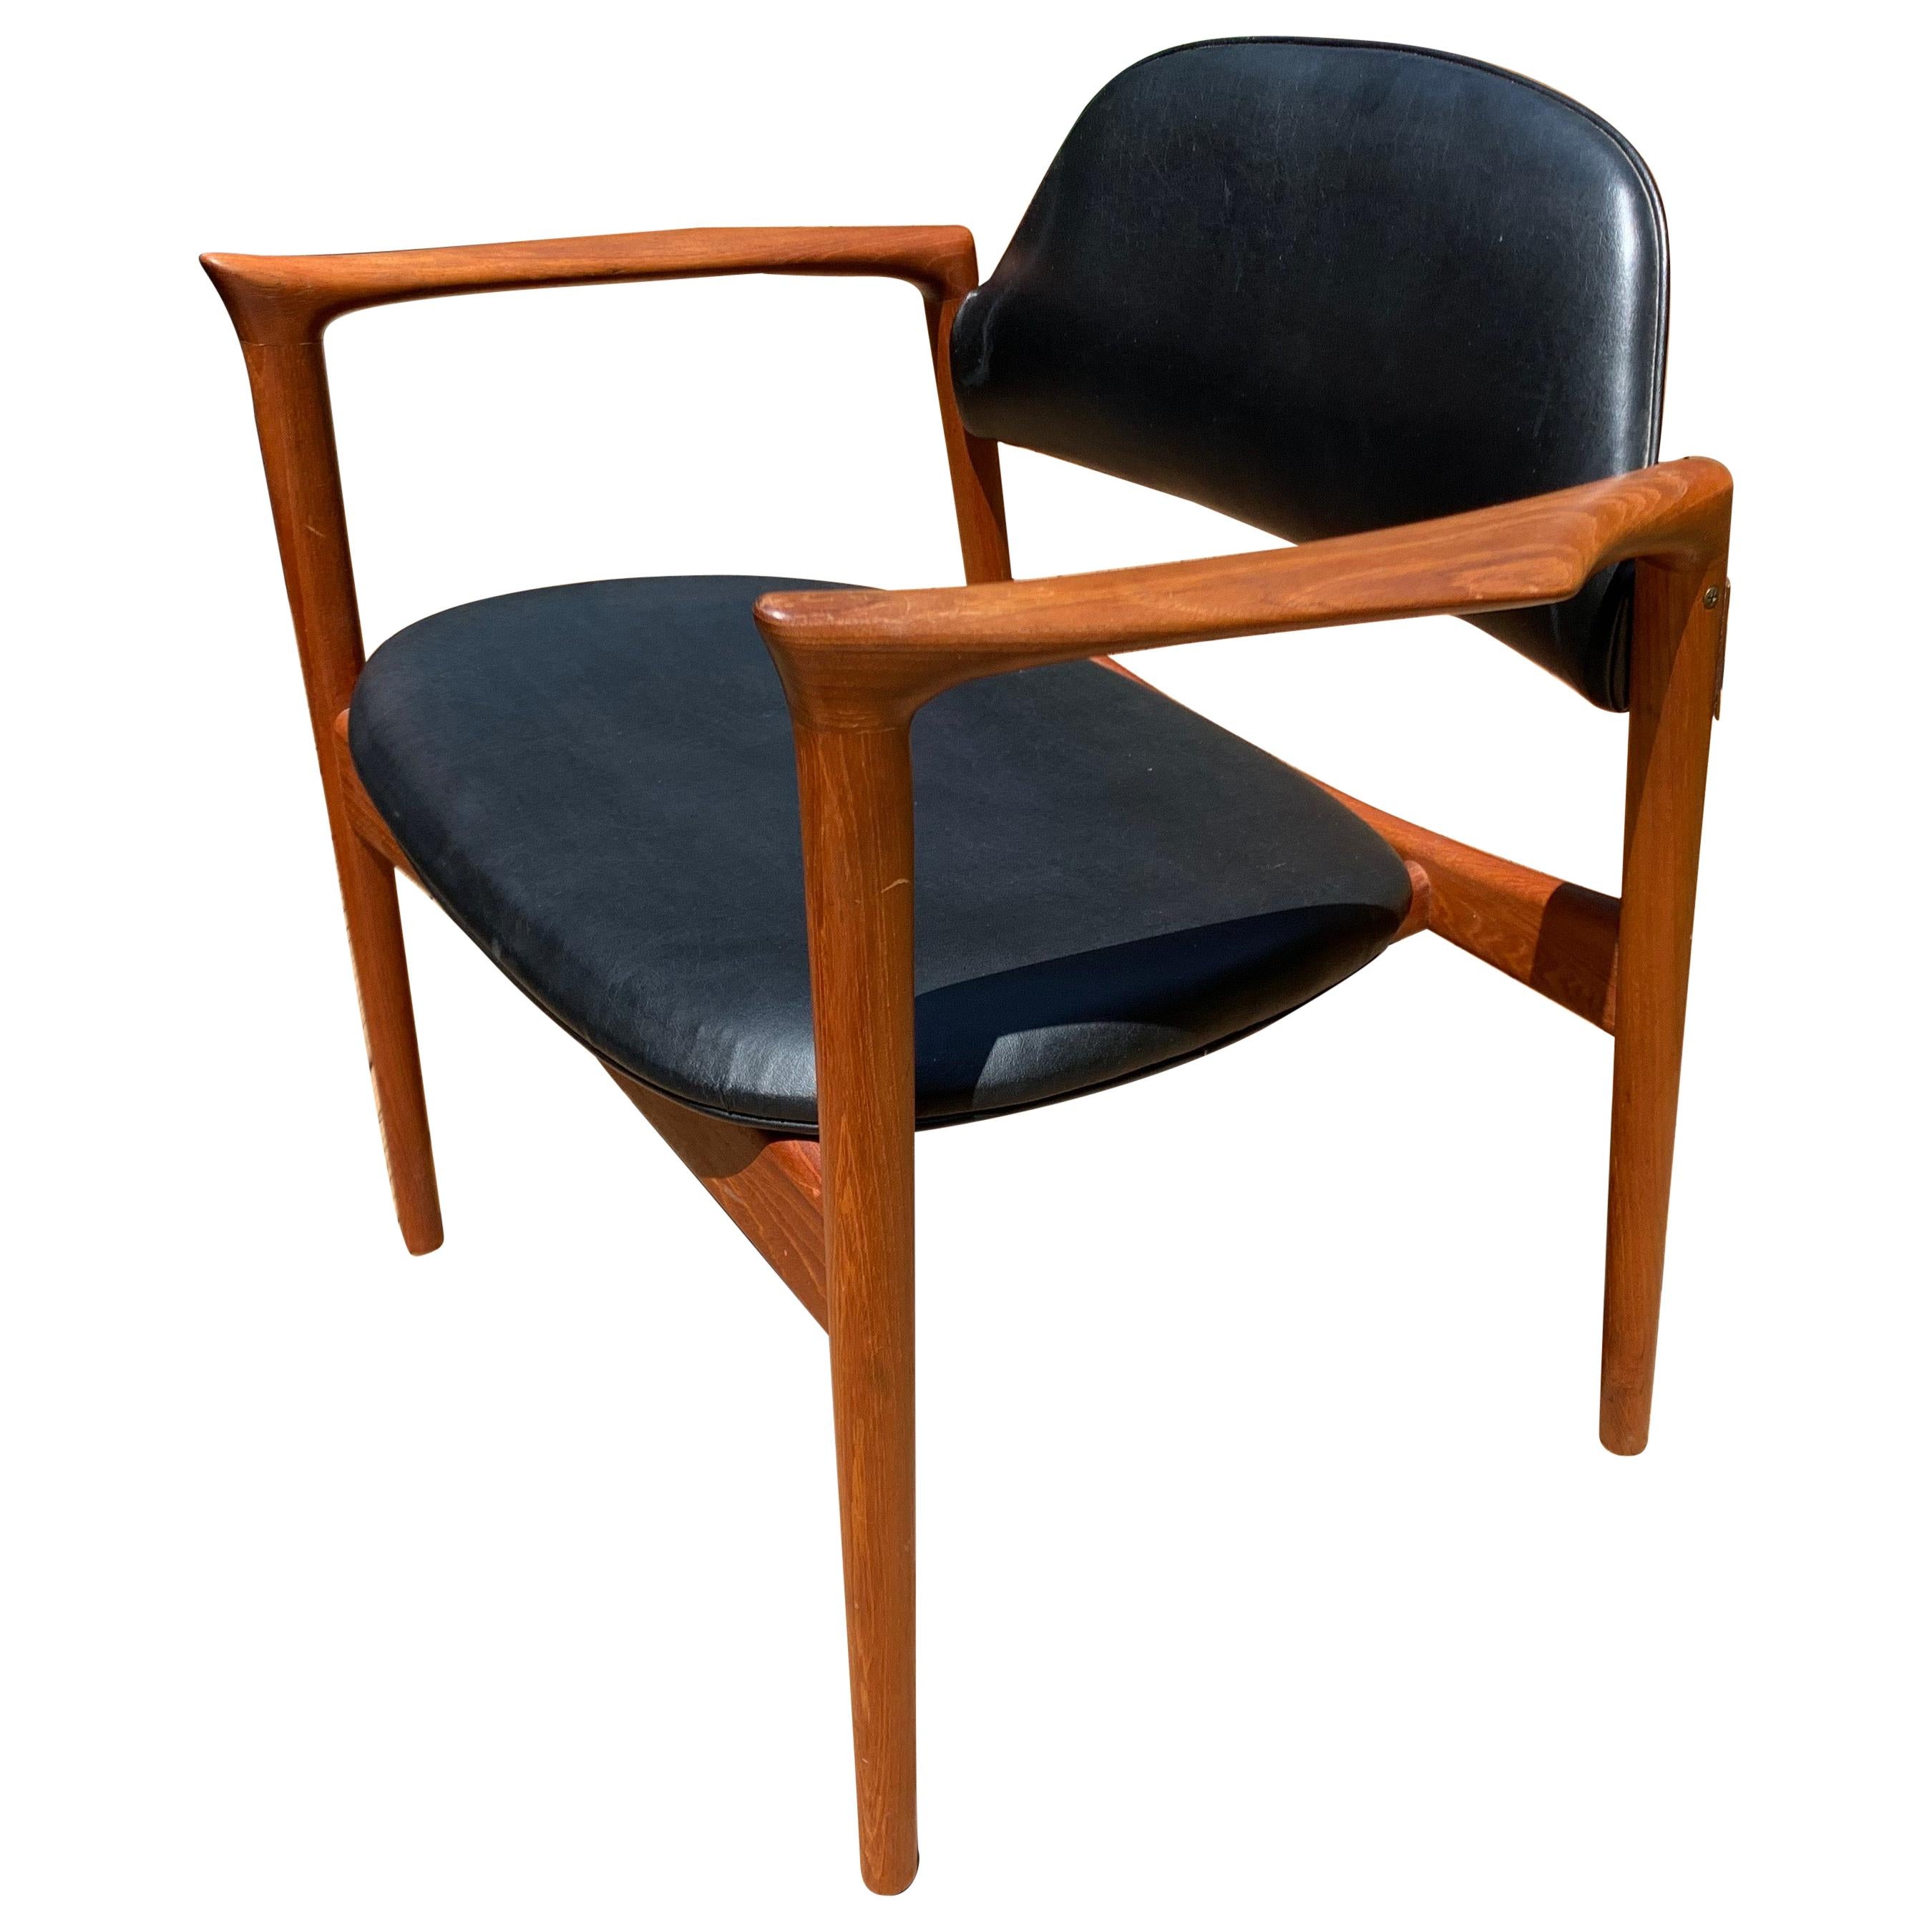 IB Kofod-Larsen Writing Chair in Teak with Leather Upholstery